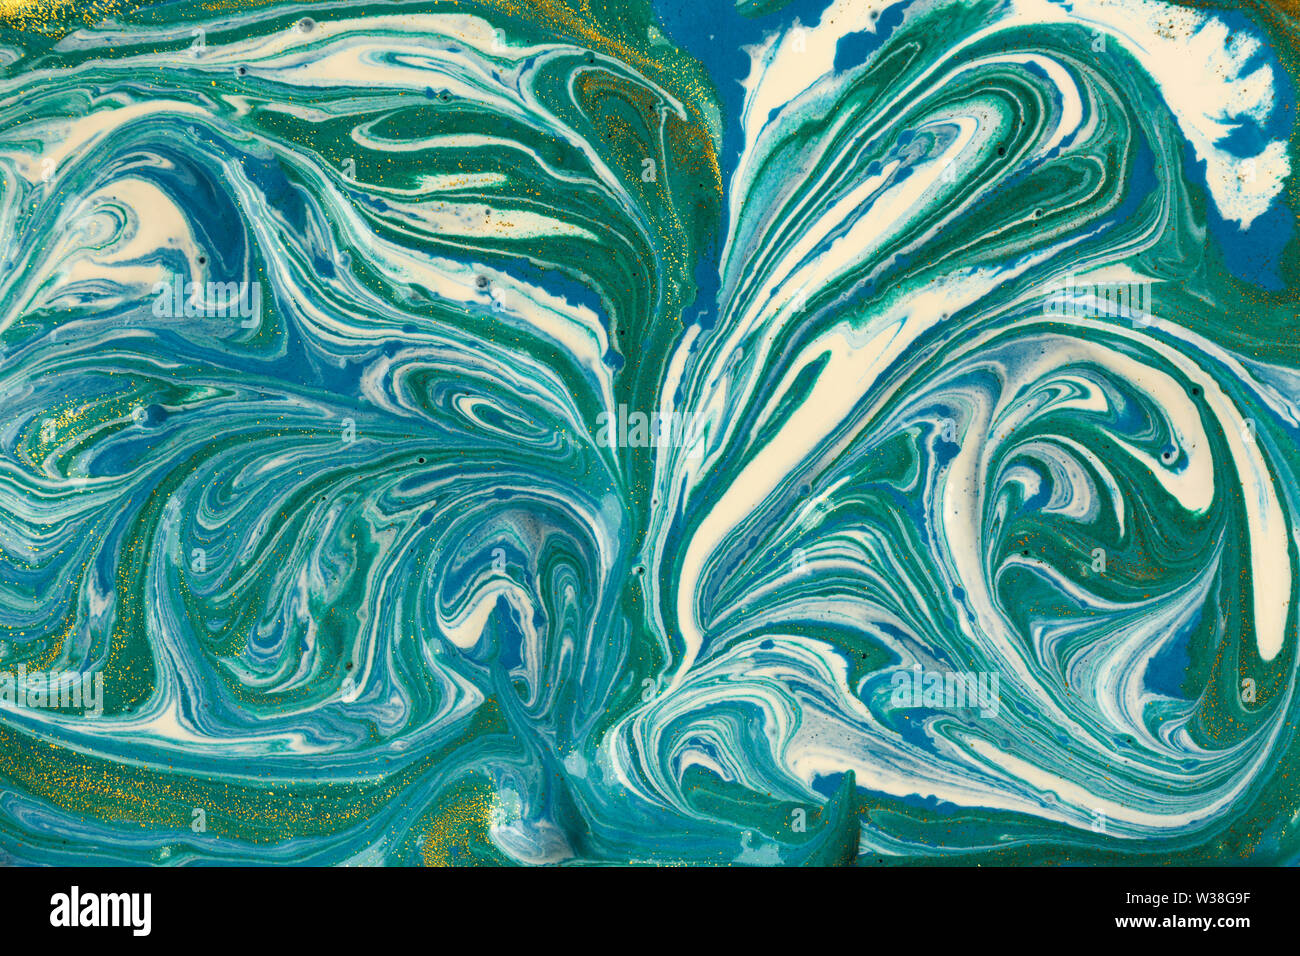 Liquid uneven blue and green marbling pattern with glare of light. Stock Photo